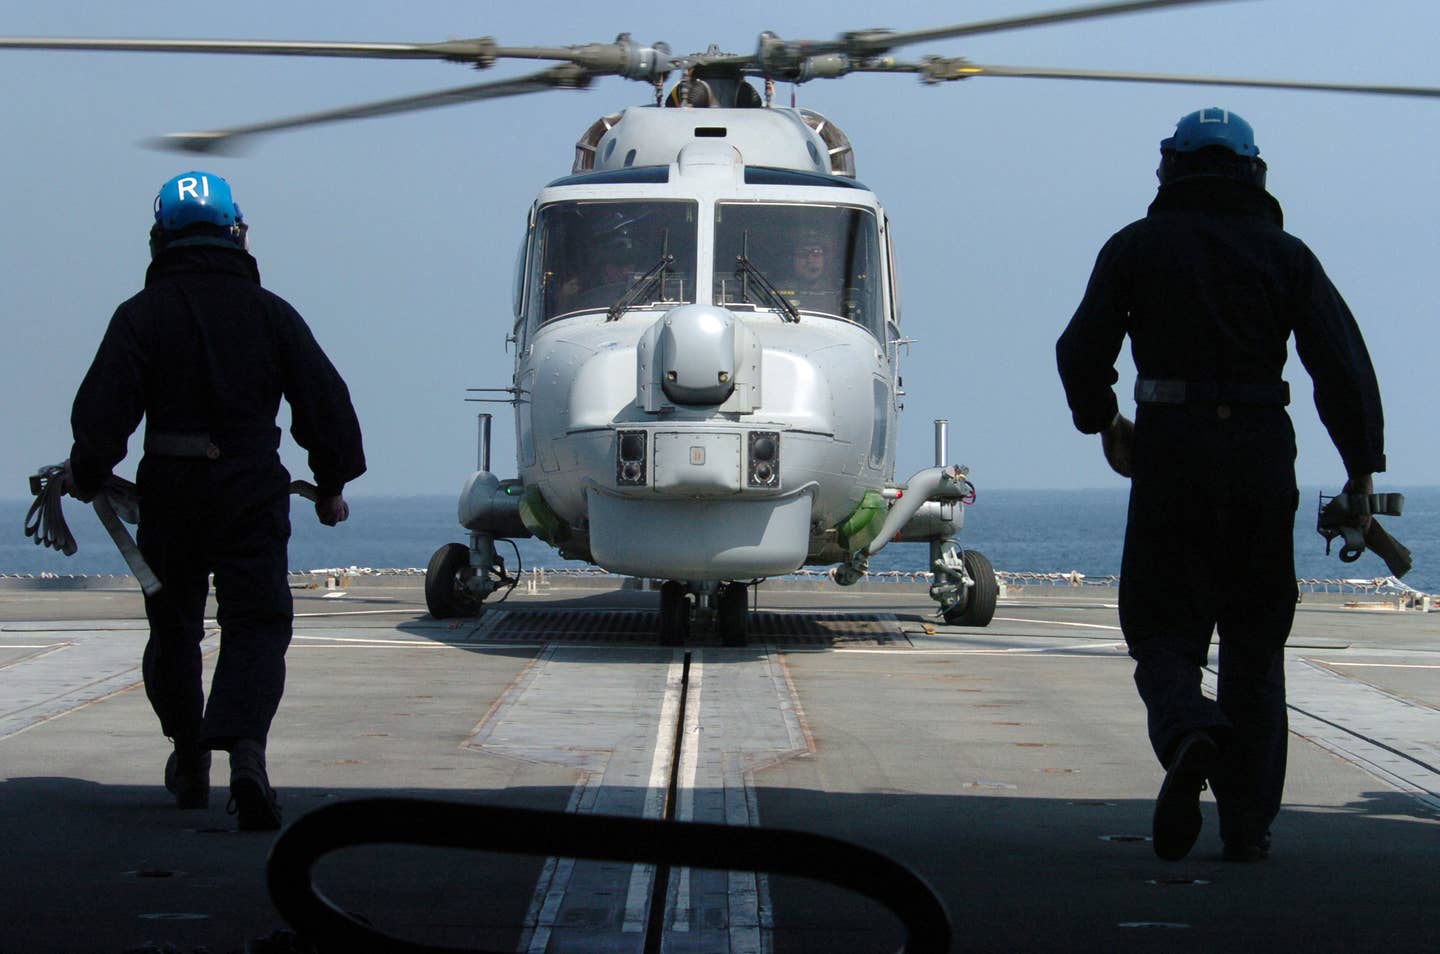 message-editor%2F1621375720048-us_navy_050220-n-1444c-038_two_royal_navy_sailors_prepare_to_chain-down_a_royal_navy_lynx_mk8_helicopter_assigned_to_815_squadron_aboard_the_royal_navy_type_23_frigate_hms_grafton_f80.jpg